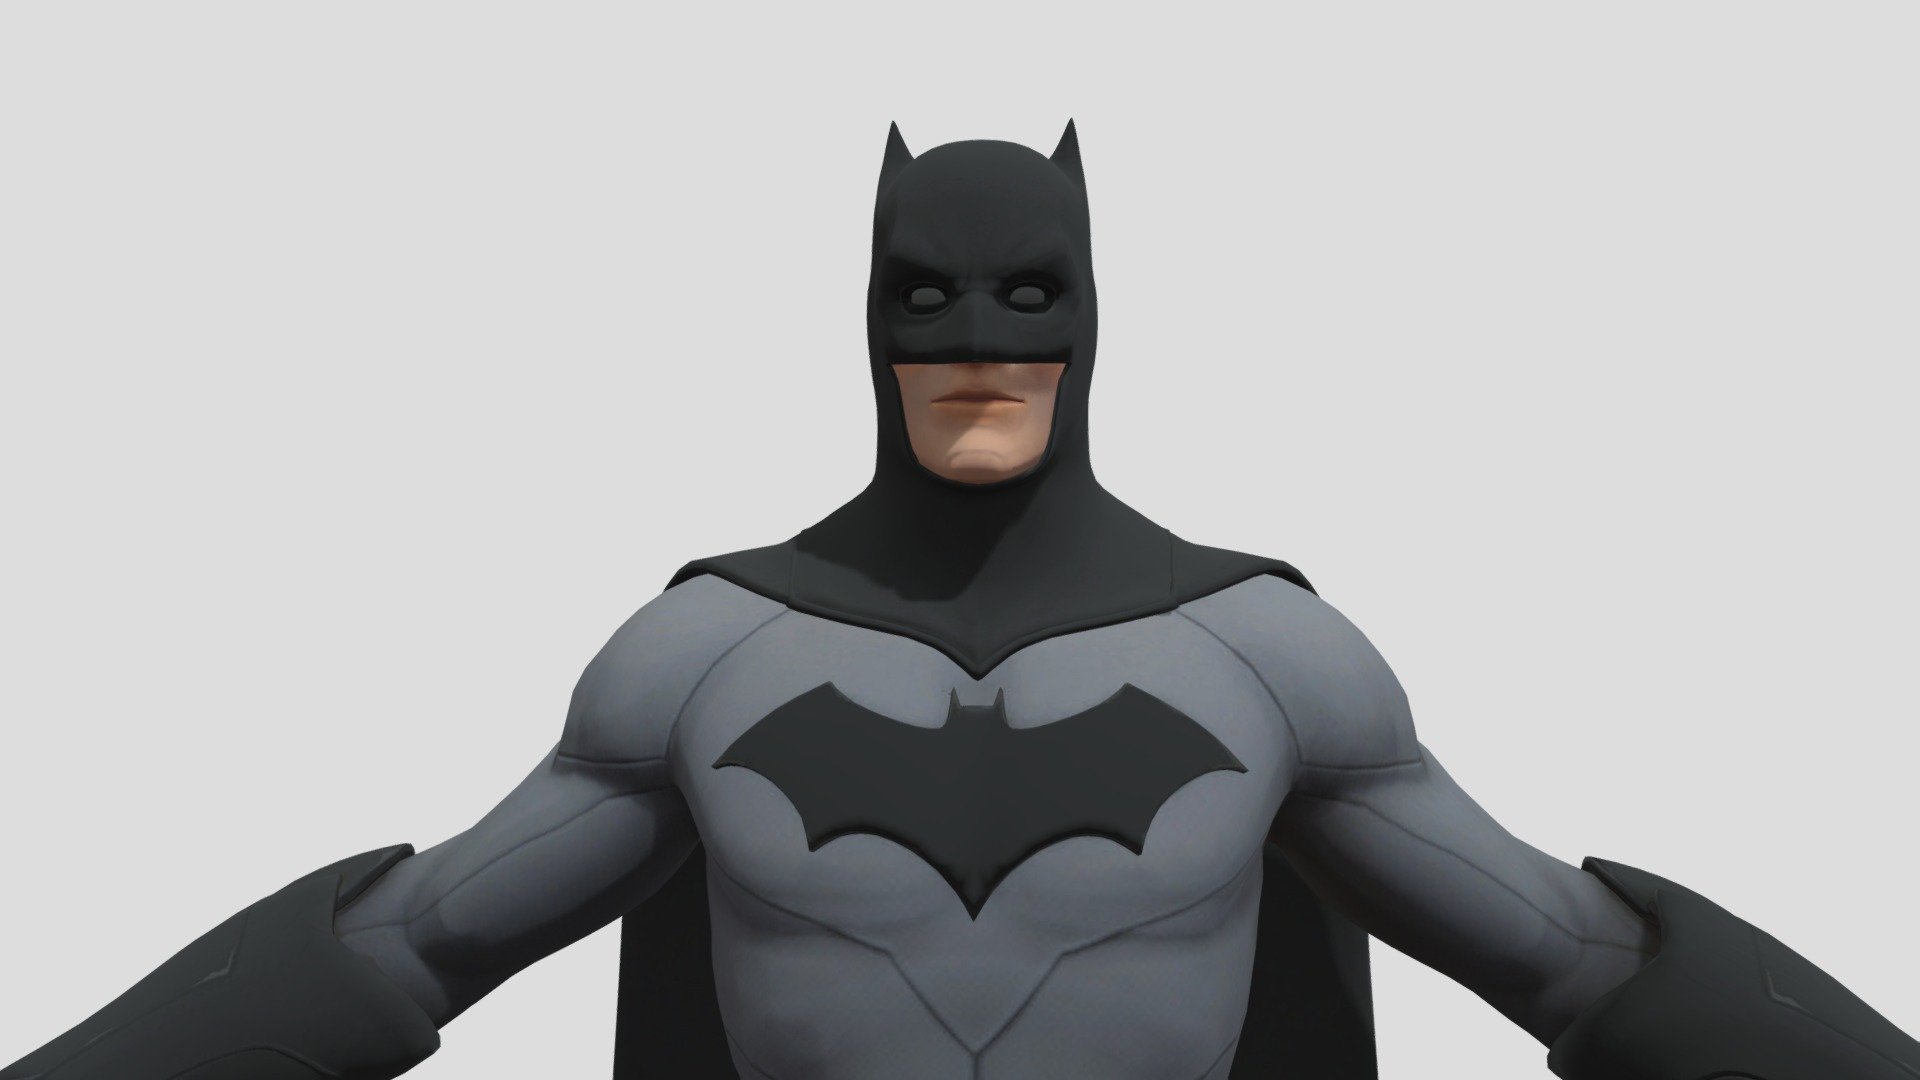 Ready to animate in blender
Full rig with facial controls including teeths and cape attach to model with working cloth simulation setup
made in blender with riggify and using the model of EWtube0 https://sketchfab.com/3d-models/fortnite-batman-e86393ea772a44939b145f902dd82a45 - Fortnite Batman (ADVANCED RIG) - Download Free 3D model by northsideanimation 3d model